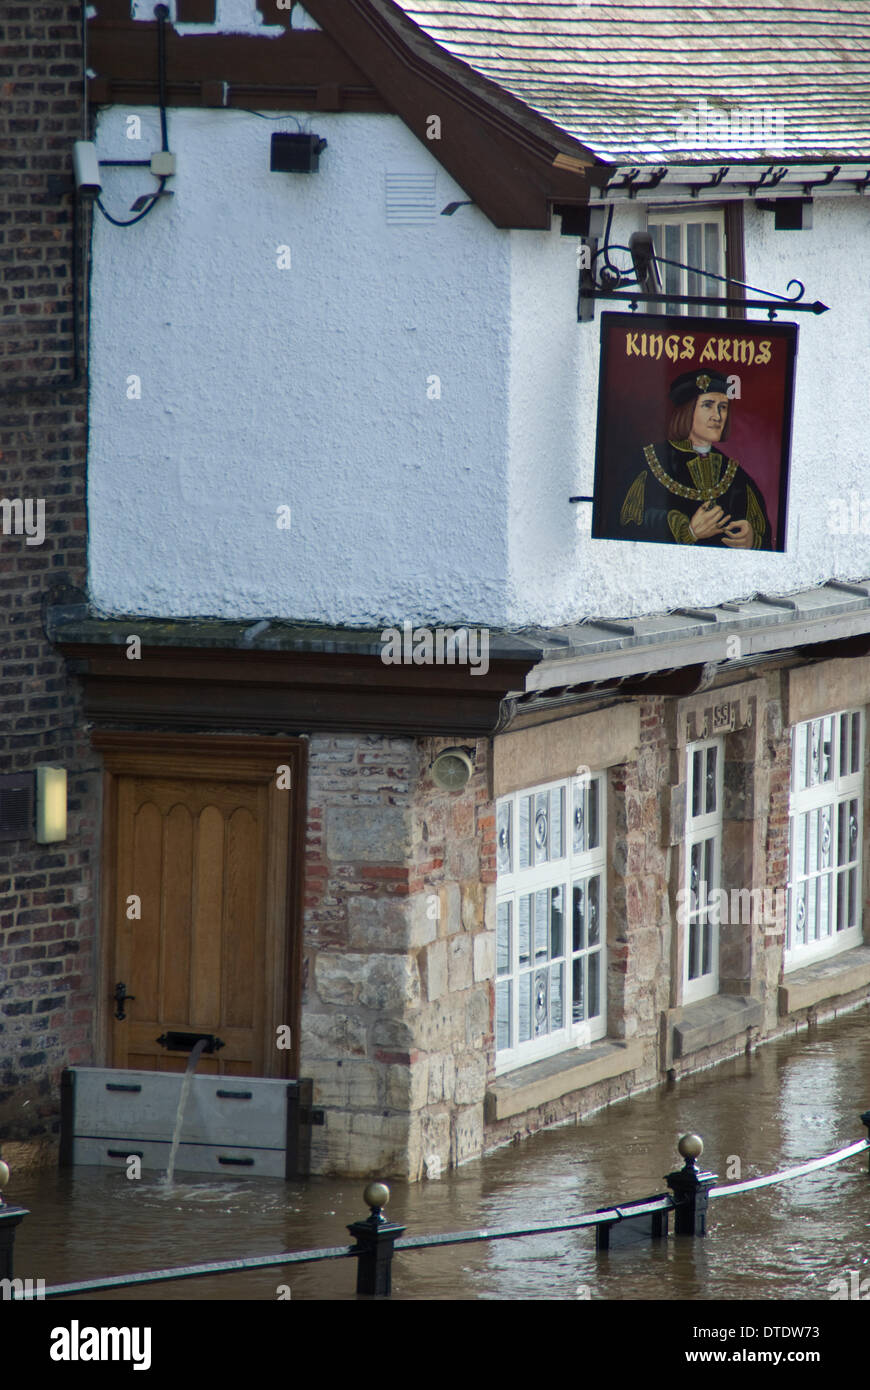 York, UK. 16th February 2014. The Kings Arms public House on King's Staith in York flooded by the river Ouse on the 16th of February. York is regularly flooded by the River Ouse. Flood defences and stategies are well rehearsed in the city, as can be seen by the barriers and the hose pipe poking through the letter box pumping water out. Credit:  CHRIS BOSWORTH/Alamy Live News Stock Photo